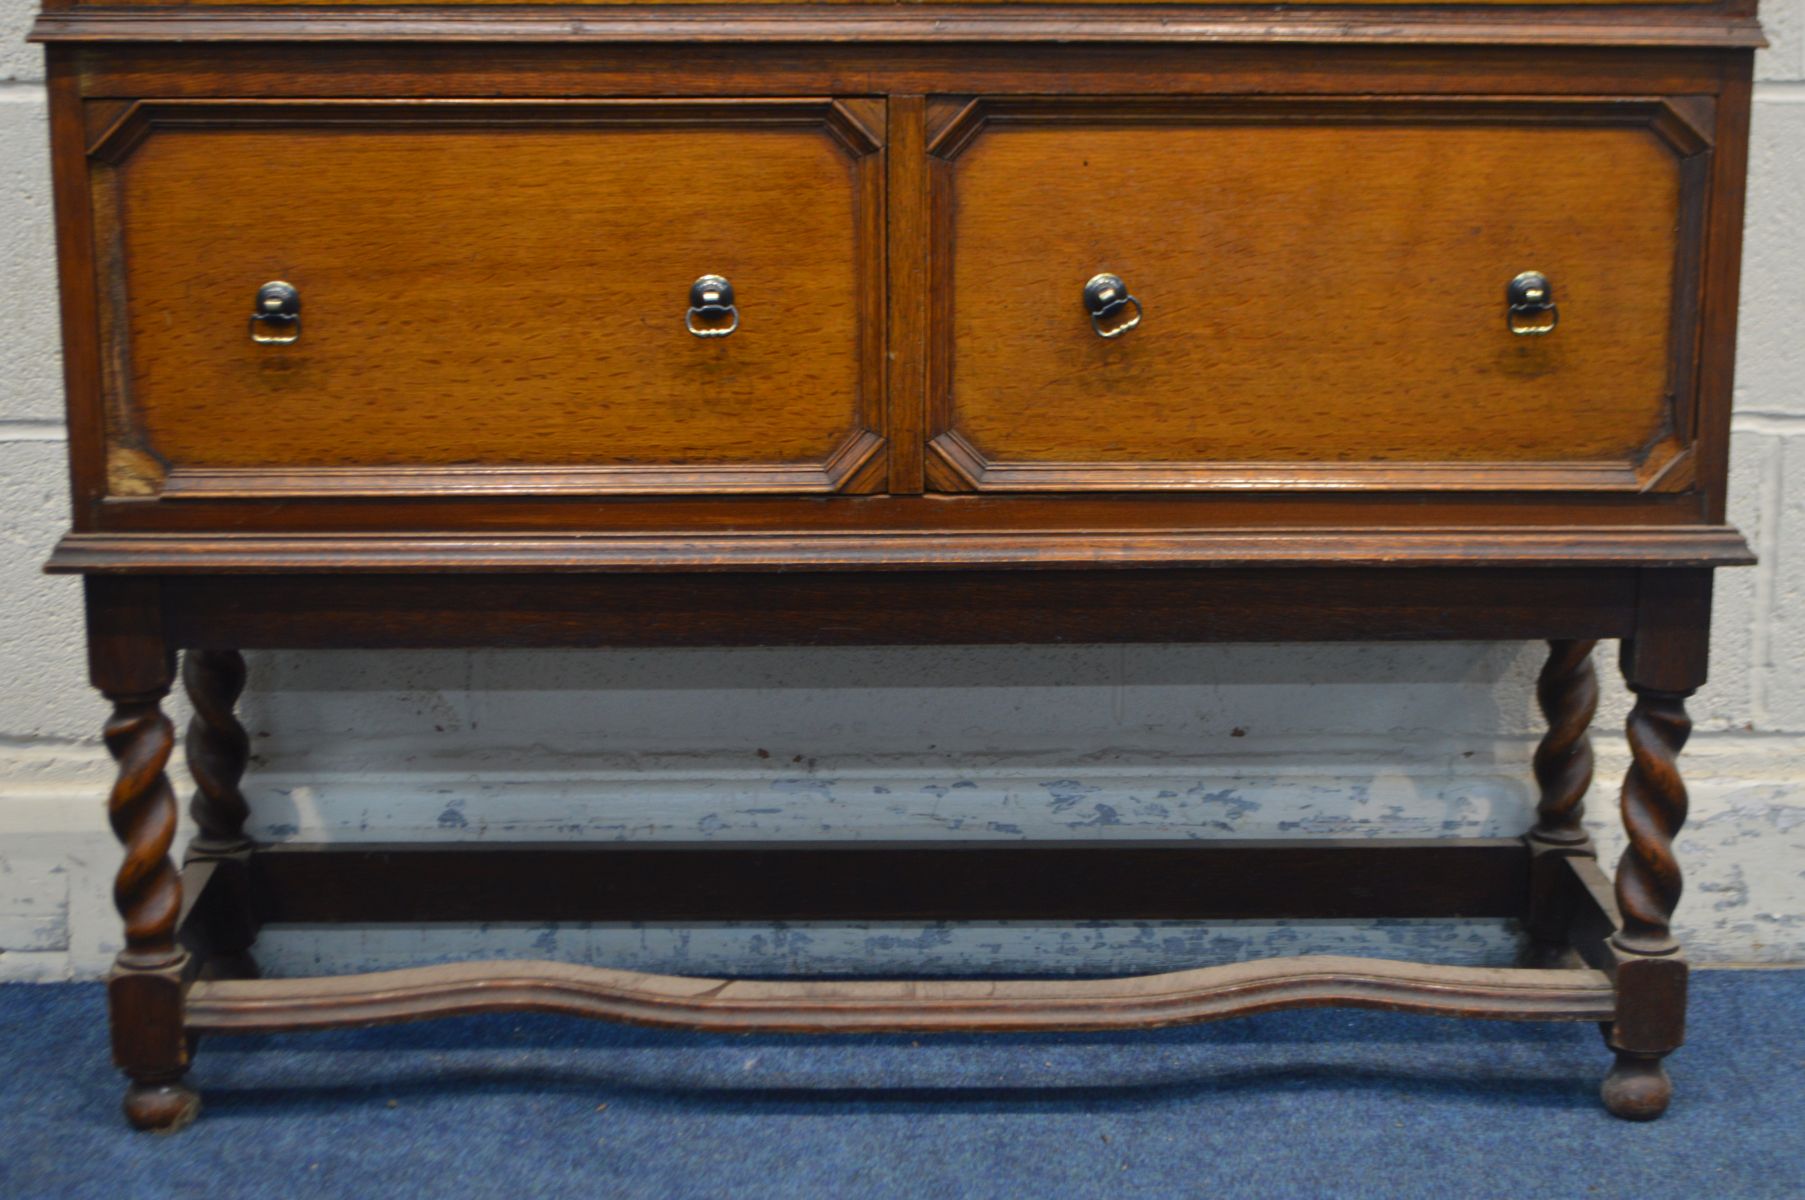 AN EARLY TO MID 20TH CENTURY OAK LEAD GLAZED ART NOUVEAU BOOKCASE, with two drawers on barley - Image 2 of 6